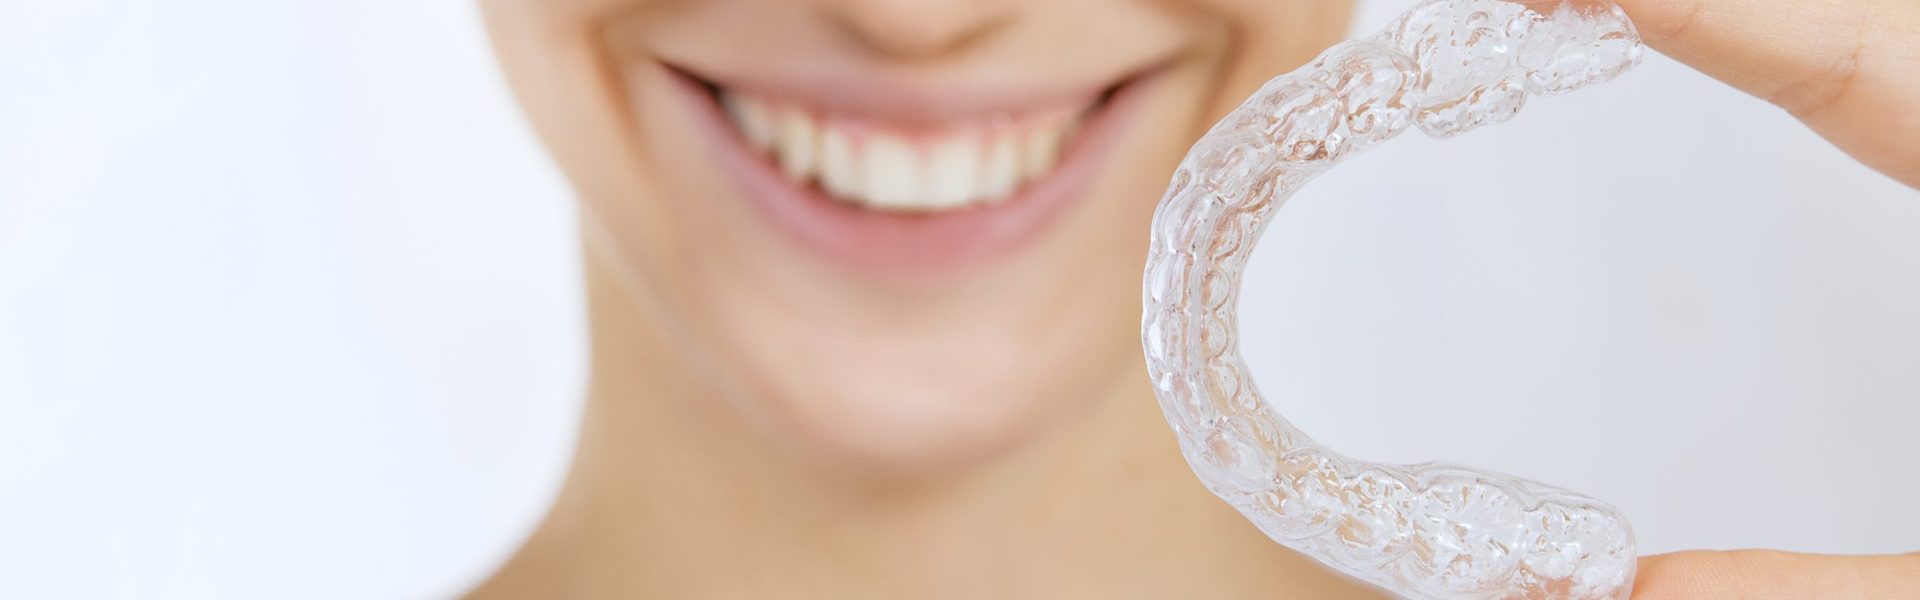 Tips for Taking Care of Your Invisalign Trays